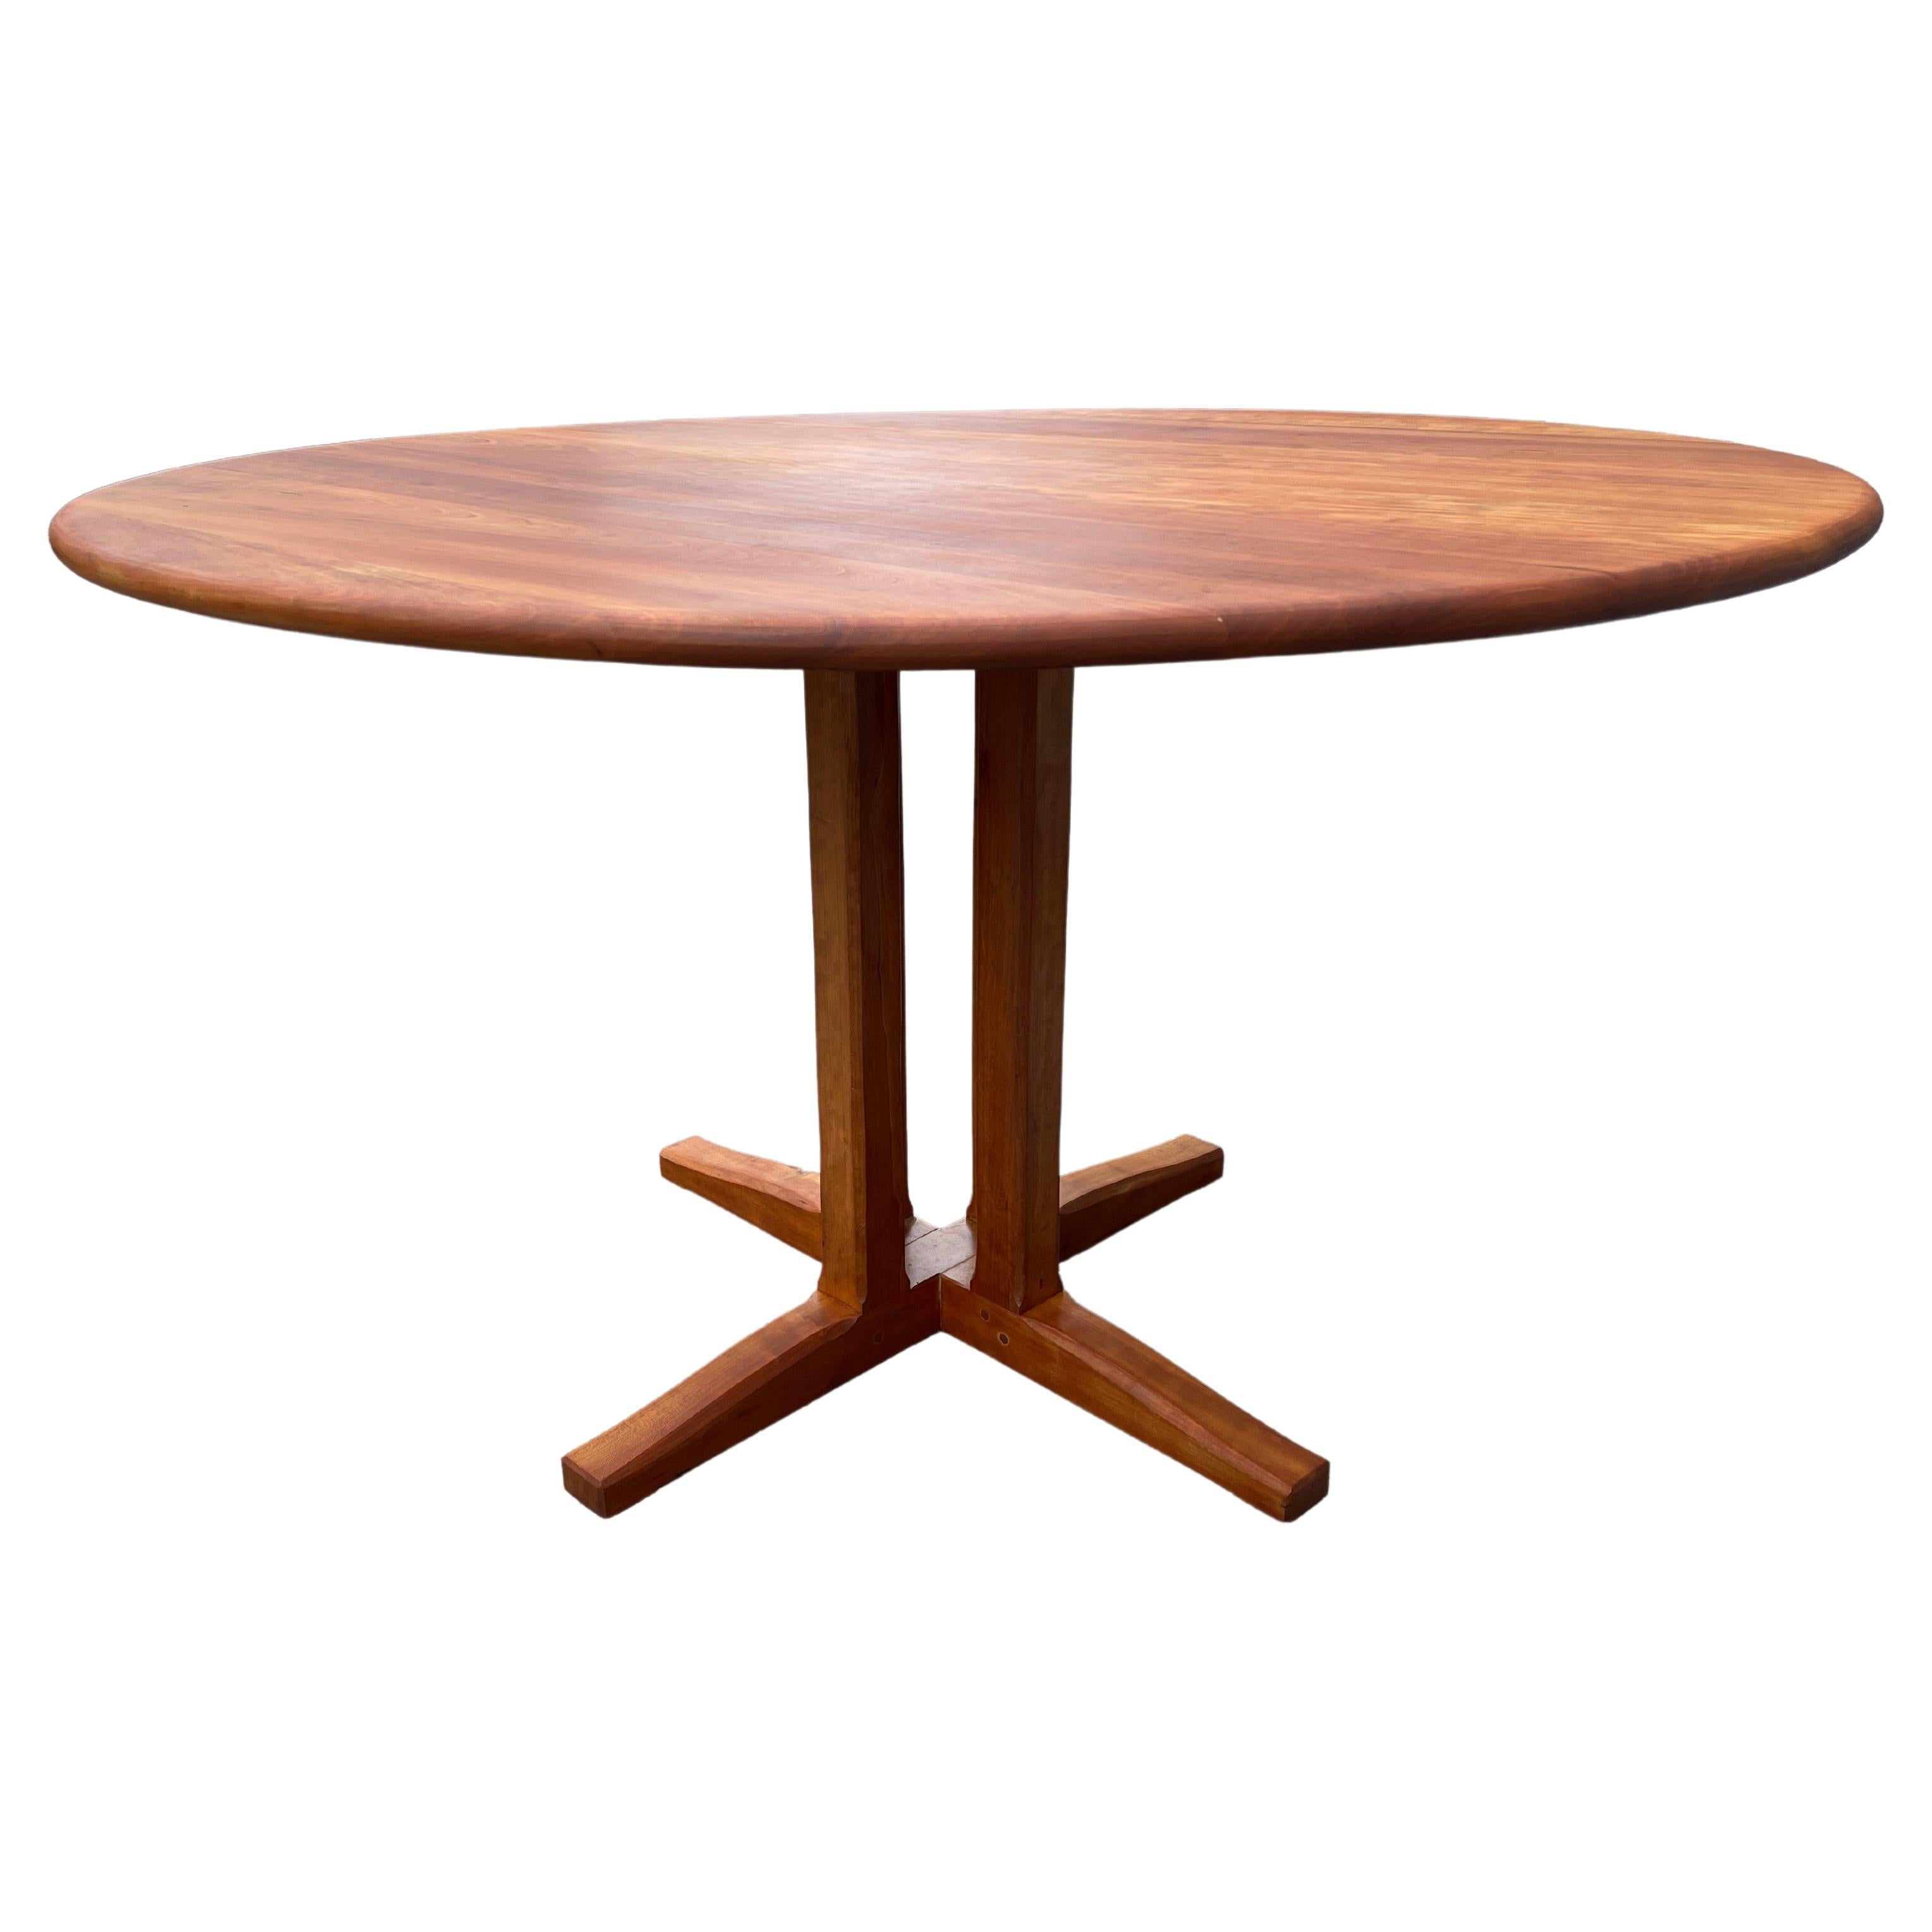 Studio Craft Round Solid Cherry Dining table by Charles Shackleton Vermont